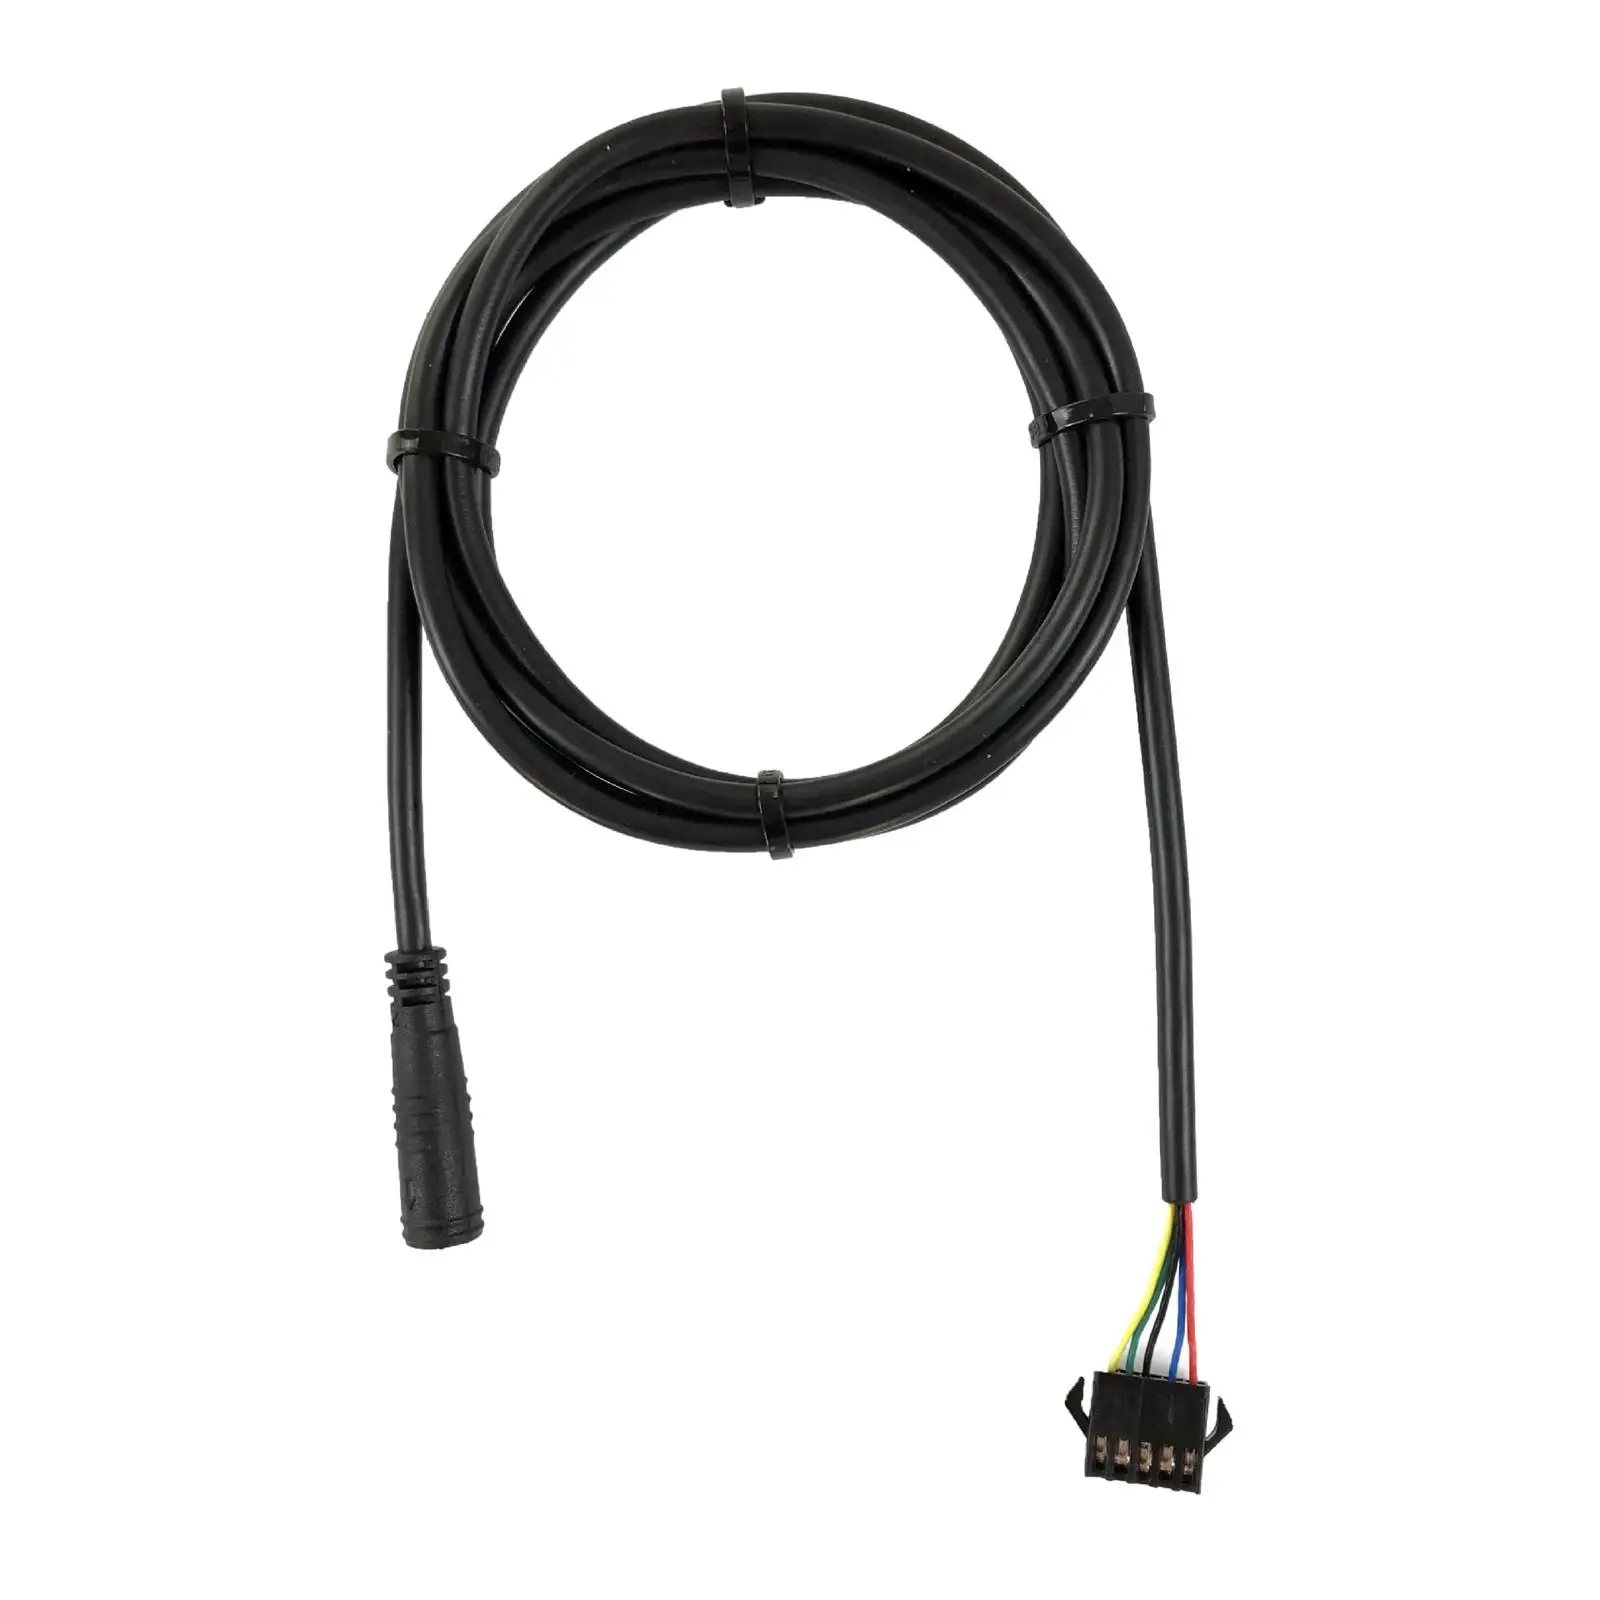 5 Pin Electric Bicycle Extension Cable Plug Connector 57inch Components Female Electric Bicycle Connecting Cable for Skateboard